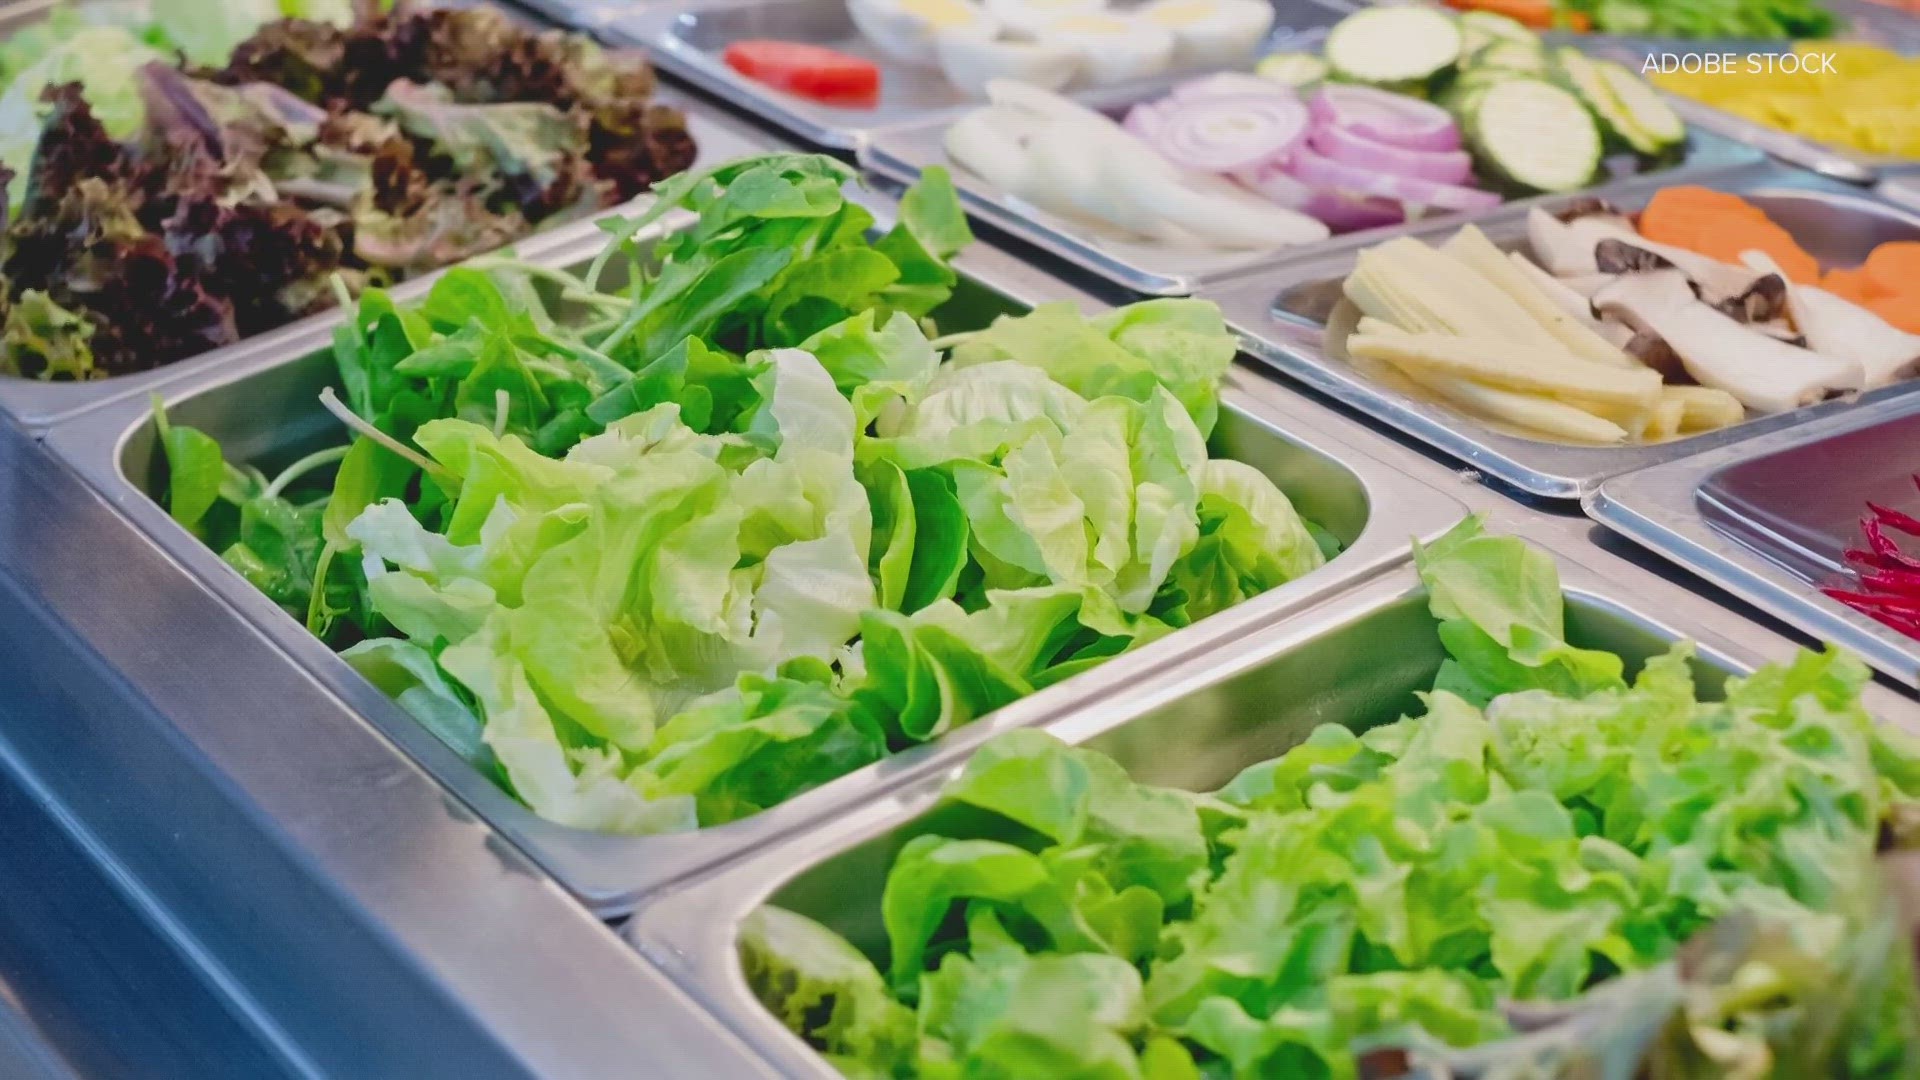 The tech-forward salad bars feature technology-enabled shielding hoods and automatic hand sanitizer and bowl dispensers. They also learn most popular ingredients.